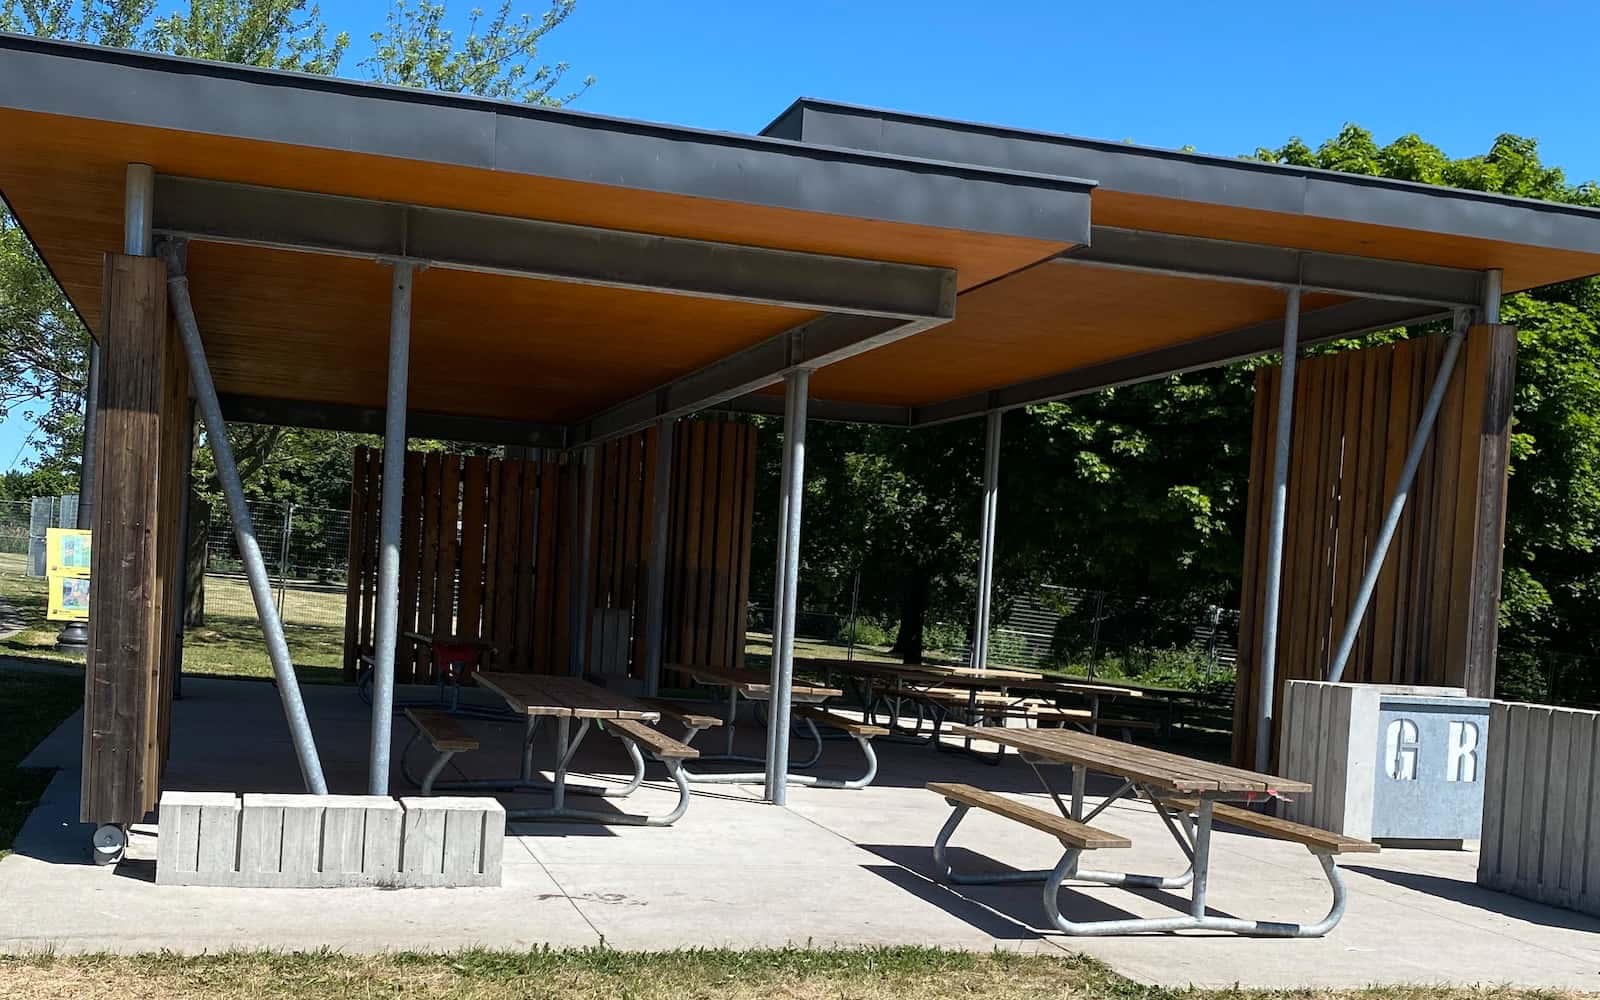 Chinguacousy Park barbecue station